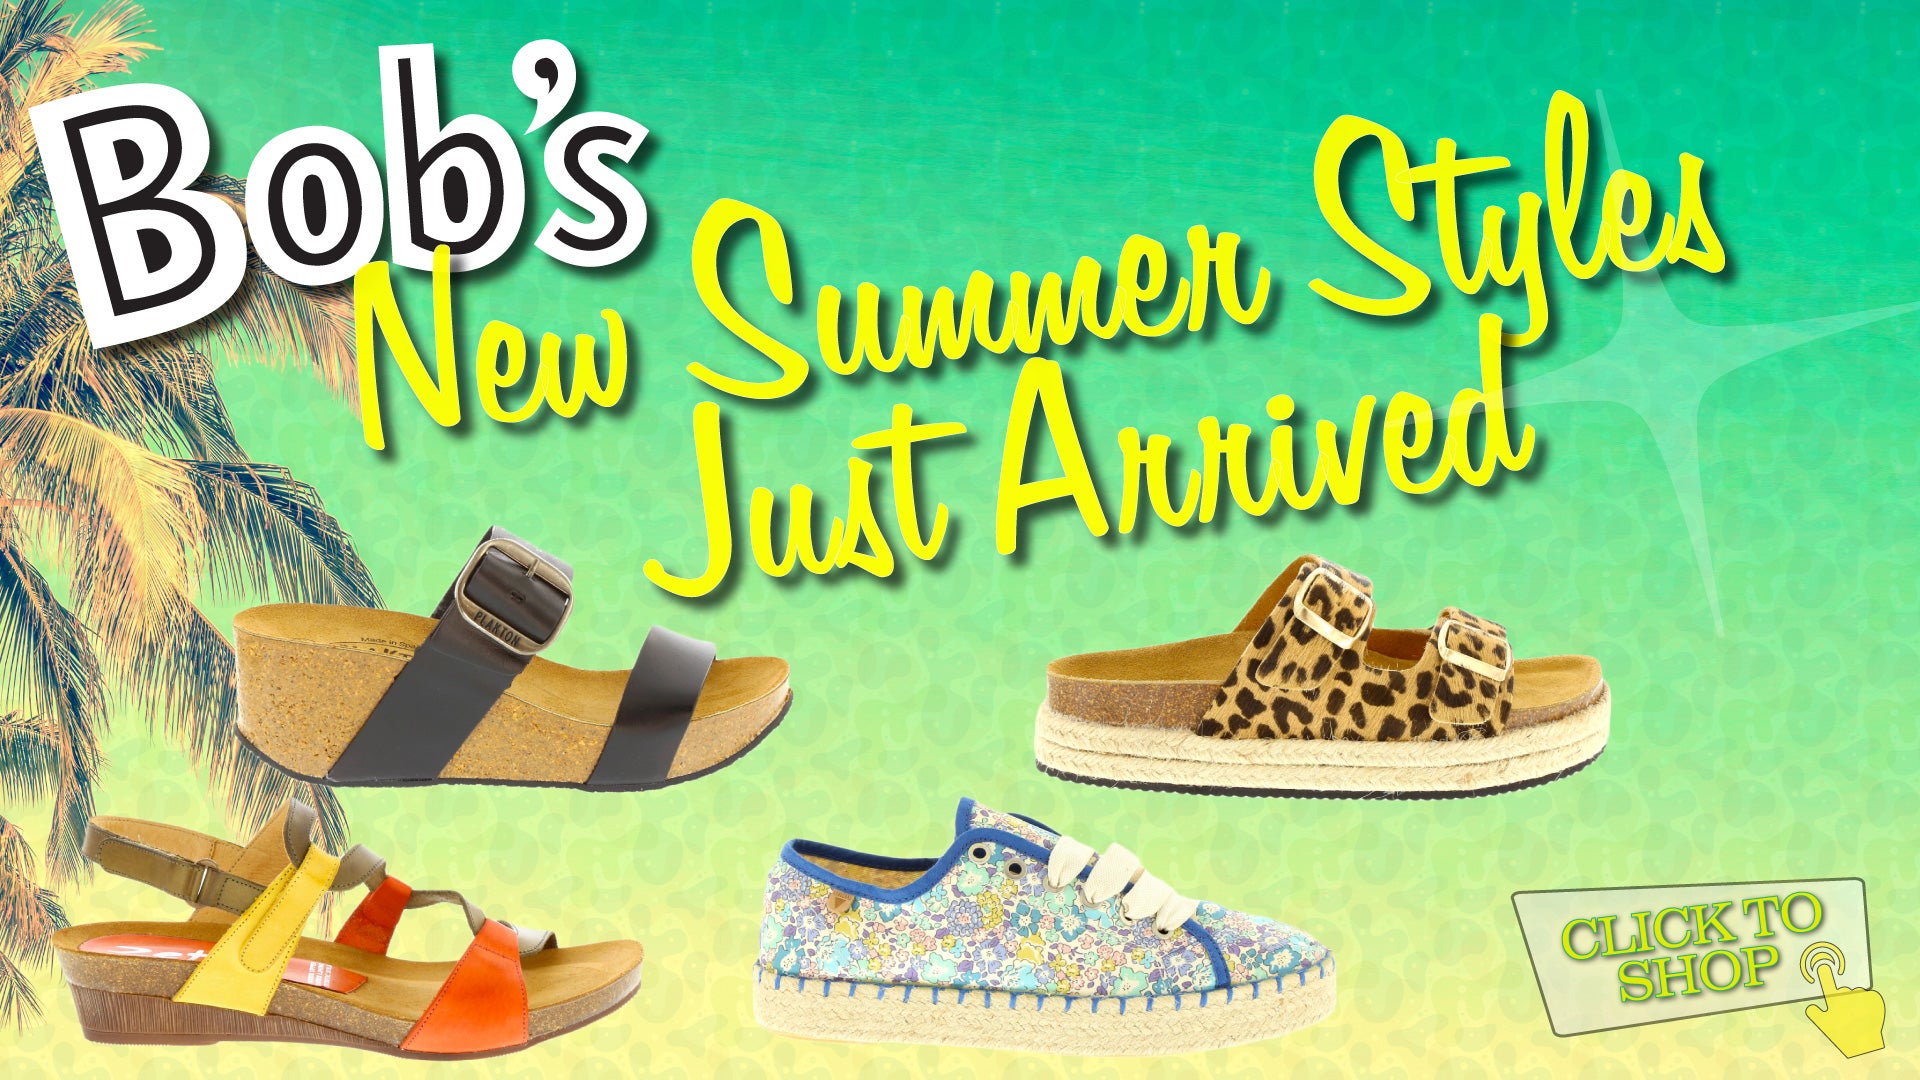 bobs shoes official website